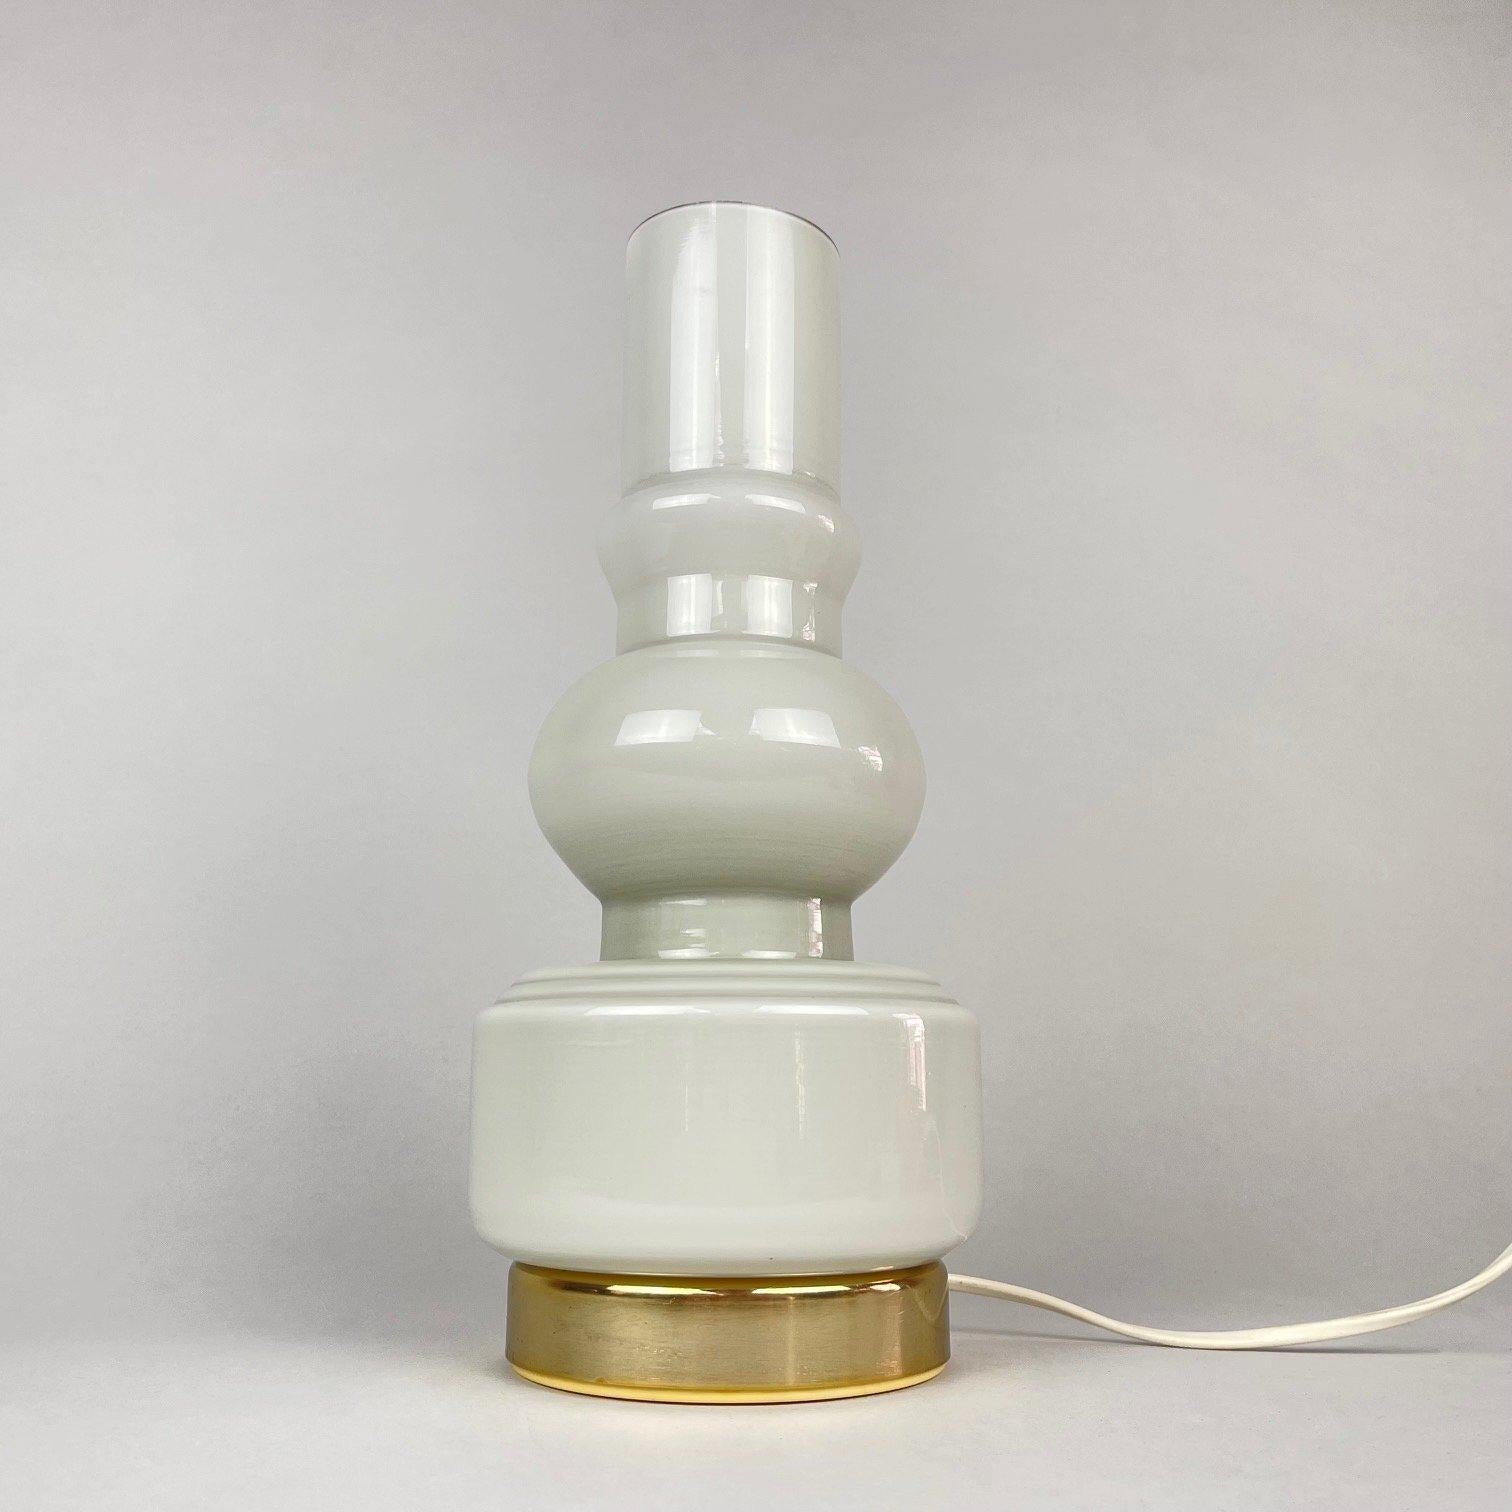 Rarely seen, vintage table lamp made of white opal glass. Brass plated finish. Original, fully functional wiring. Very good vintage condition. The brass top part is removable.
The lamp is approximately 33 cm (13 inch) high and 20 (7.88 inch) wide